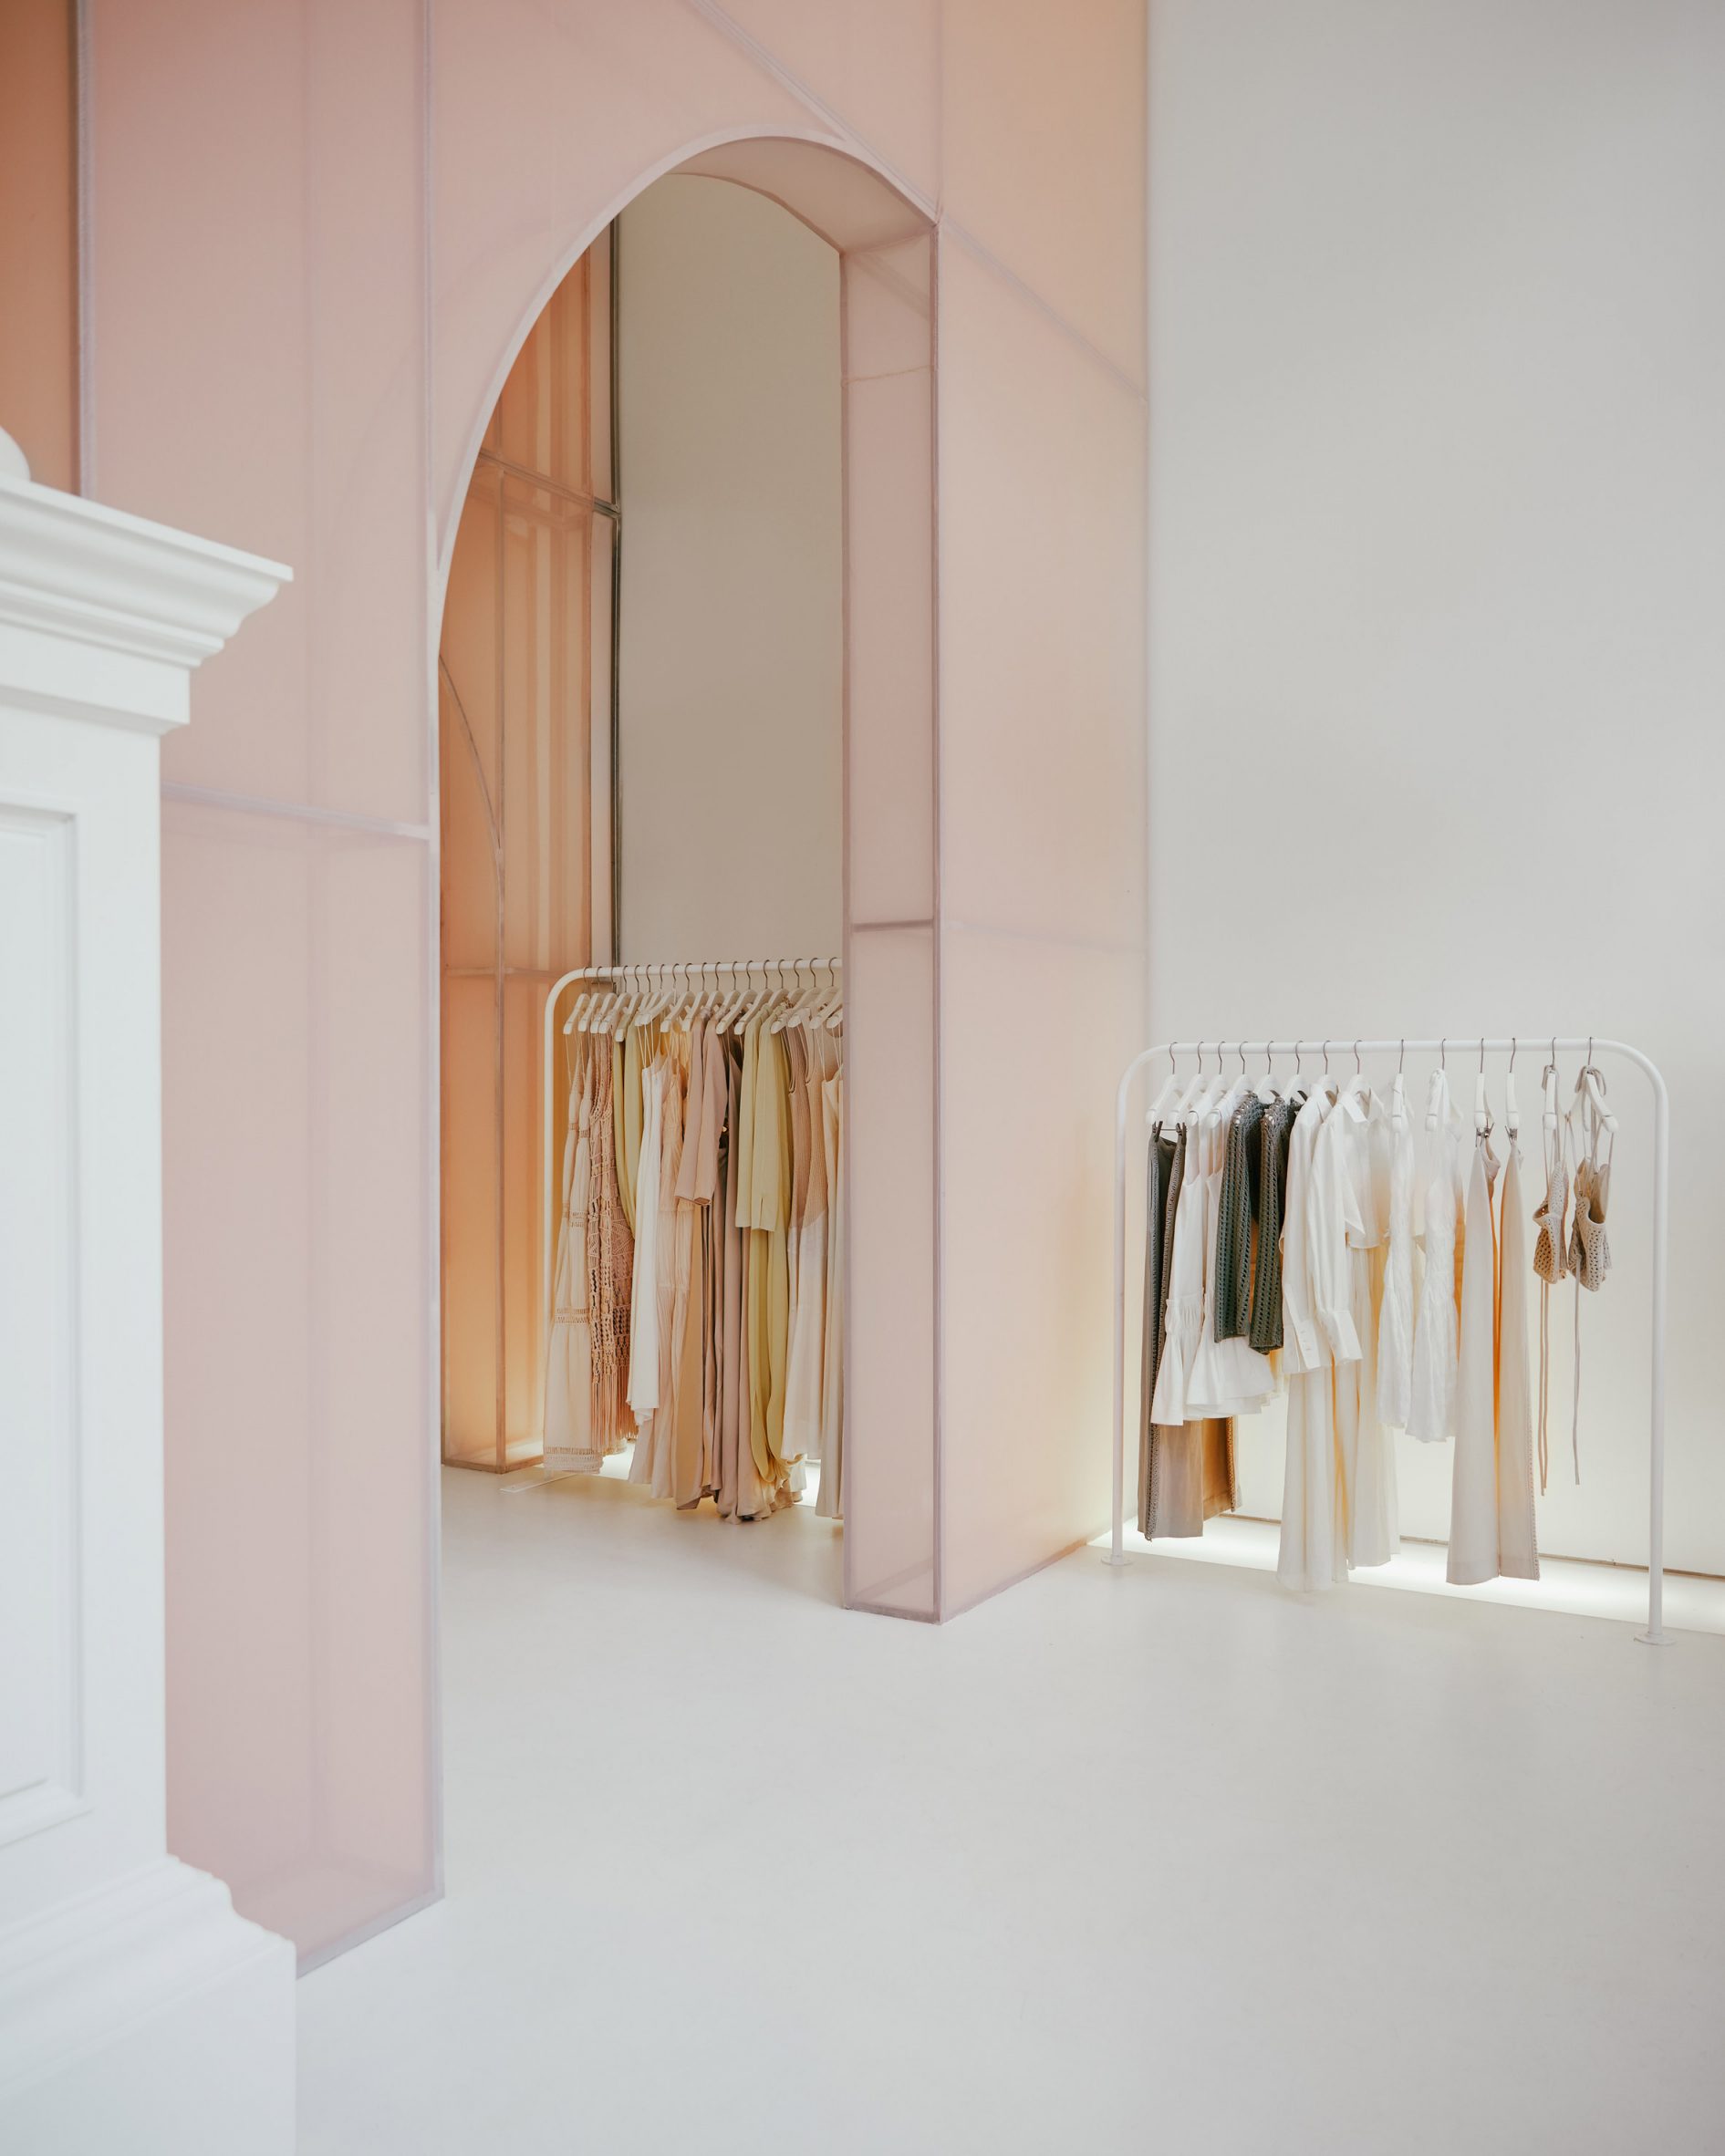 Clothing displayed on white rails between fabric partitions